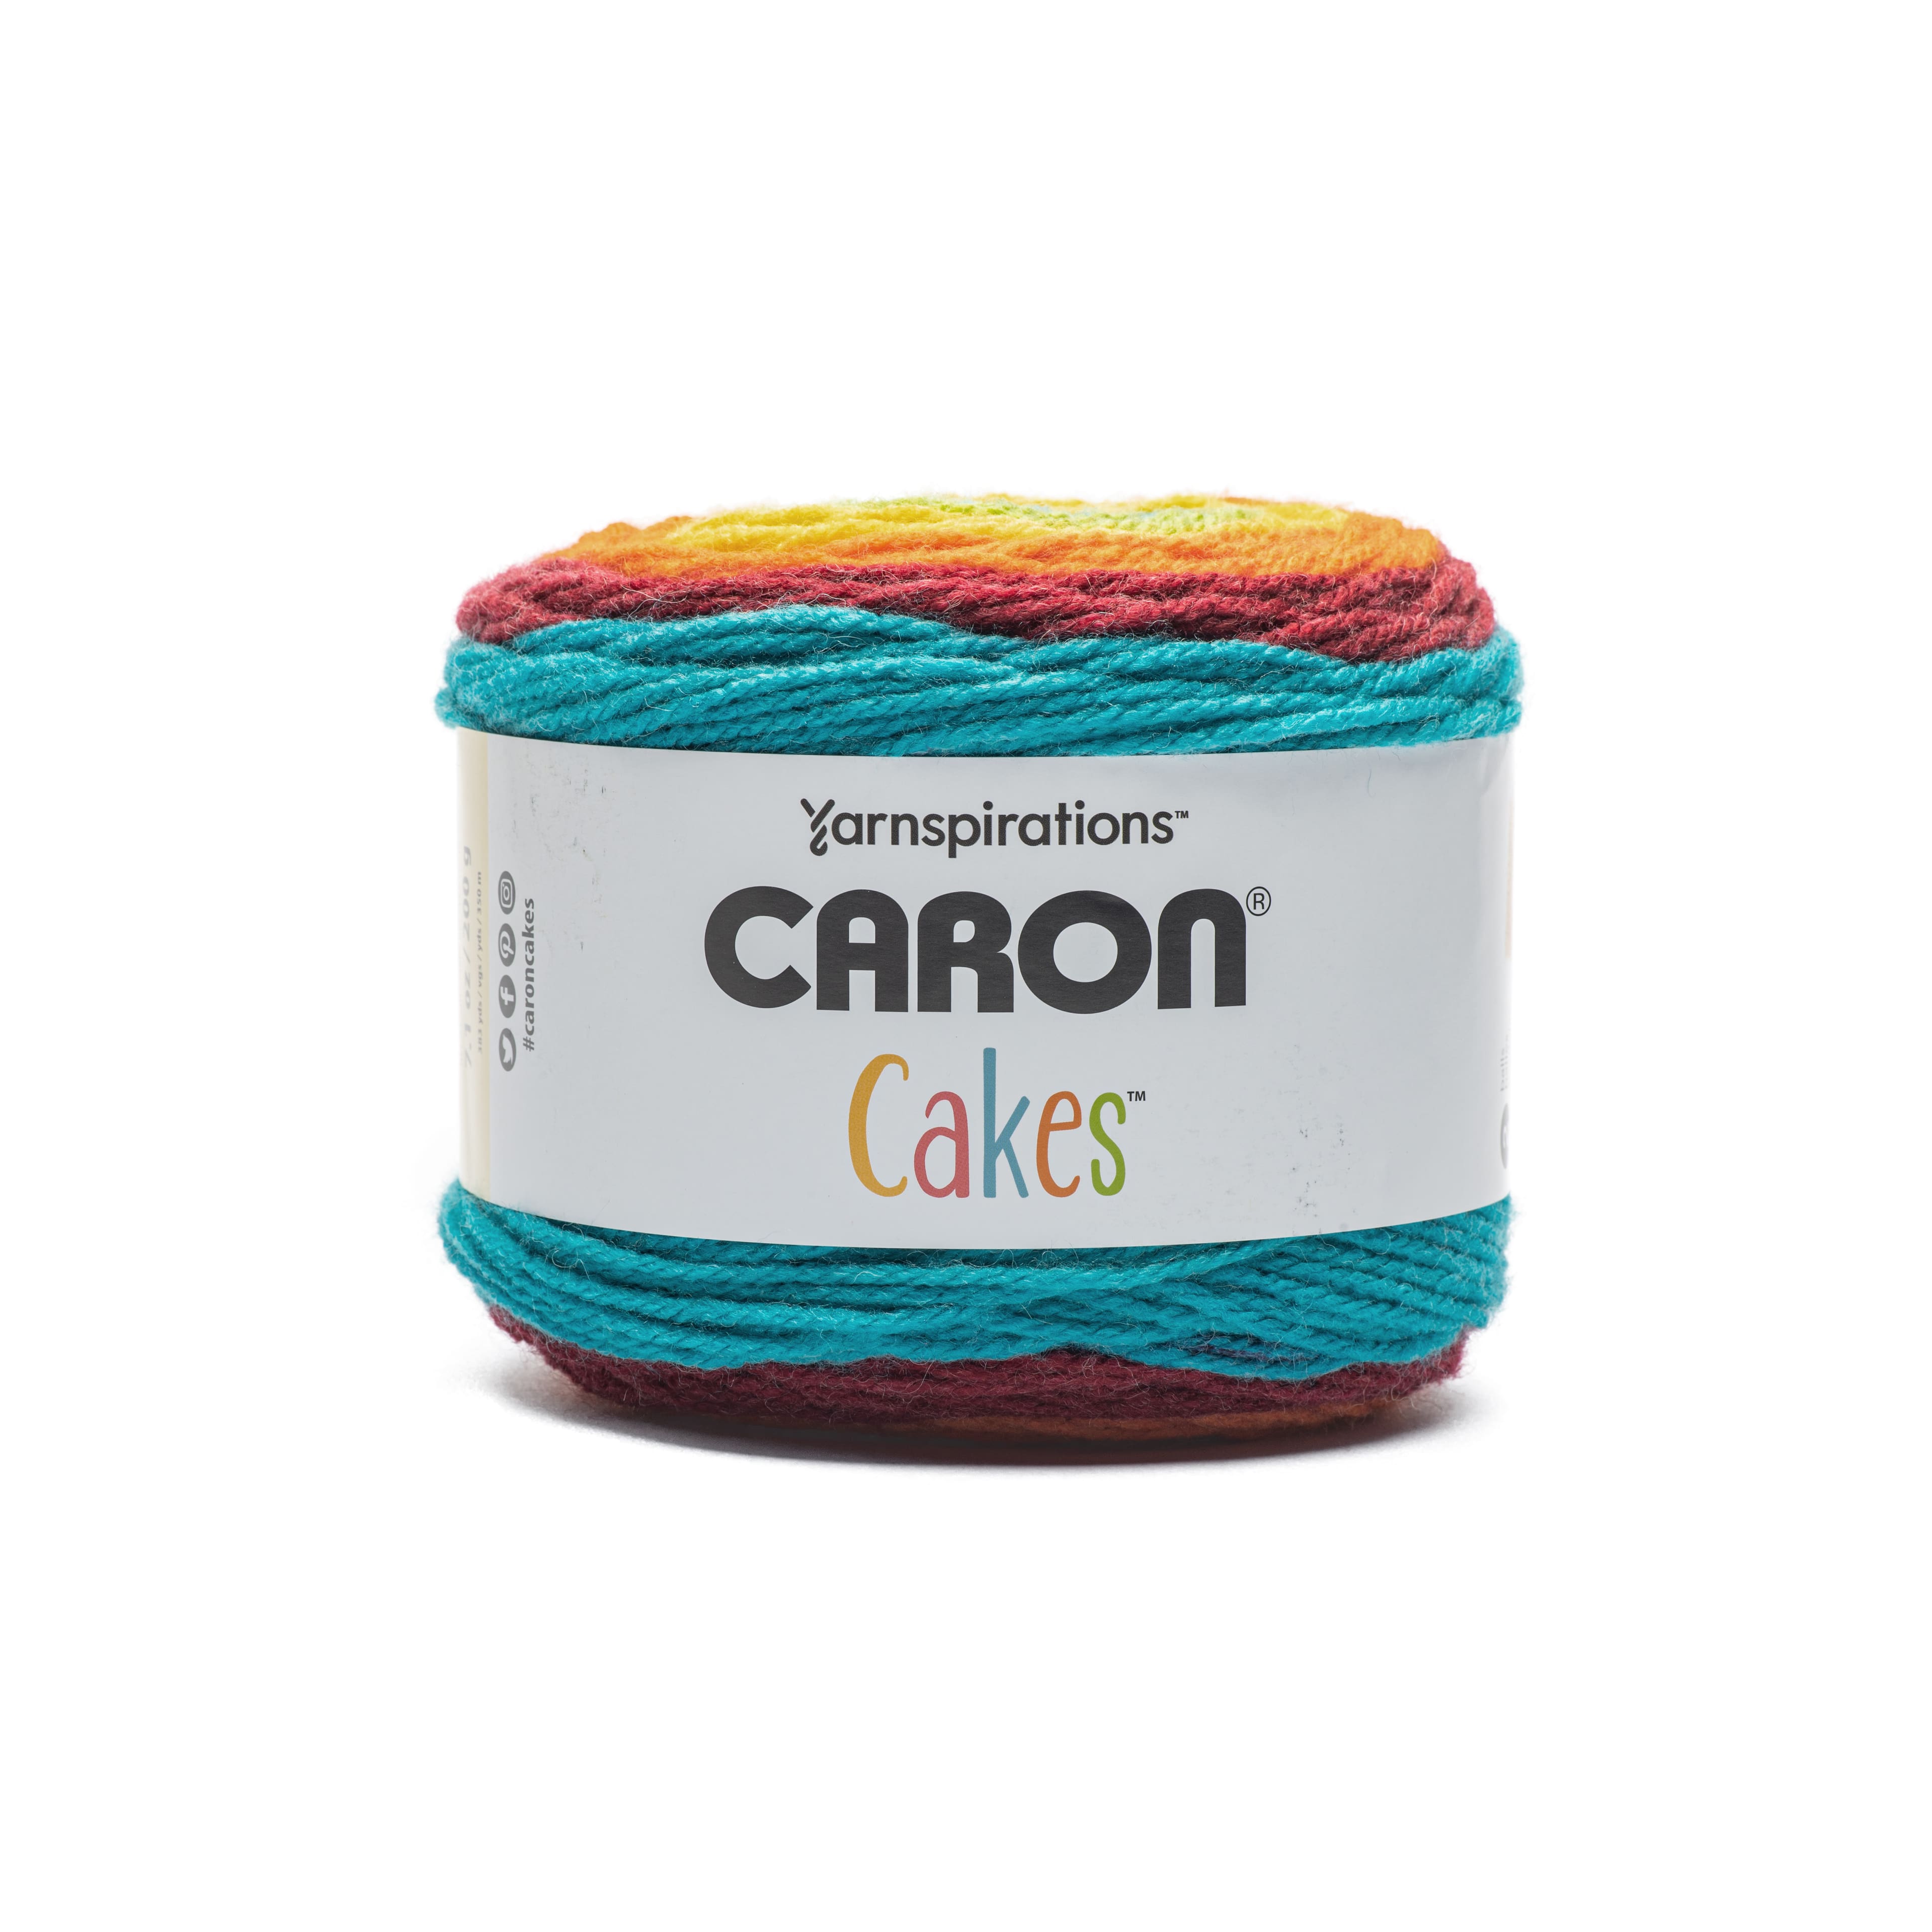 Discontinued Caron Cakes Colors: 8 NEW colors and 9 DISCONTINUED